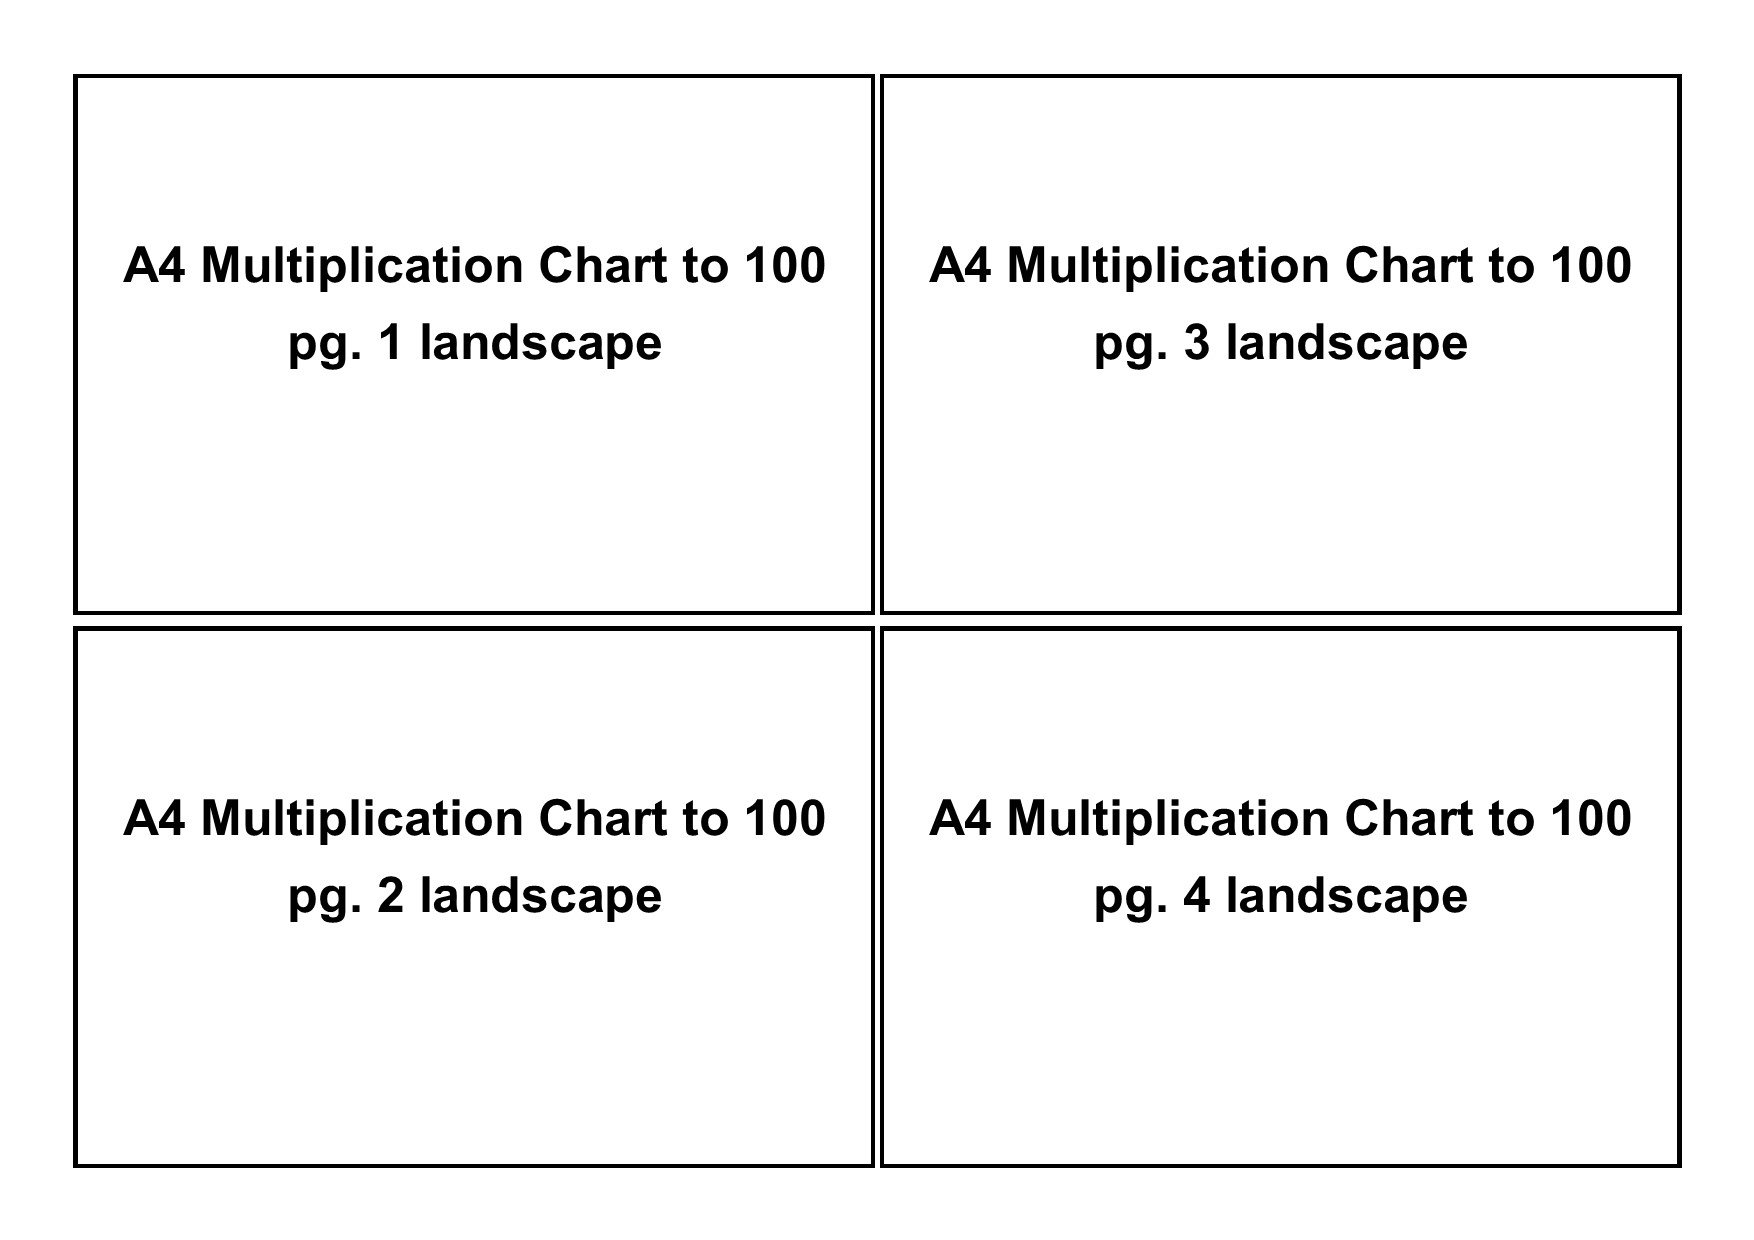 Multiplication Chart Black And White